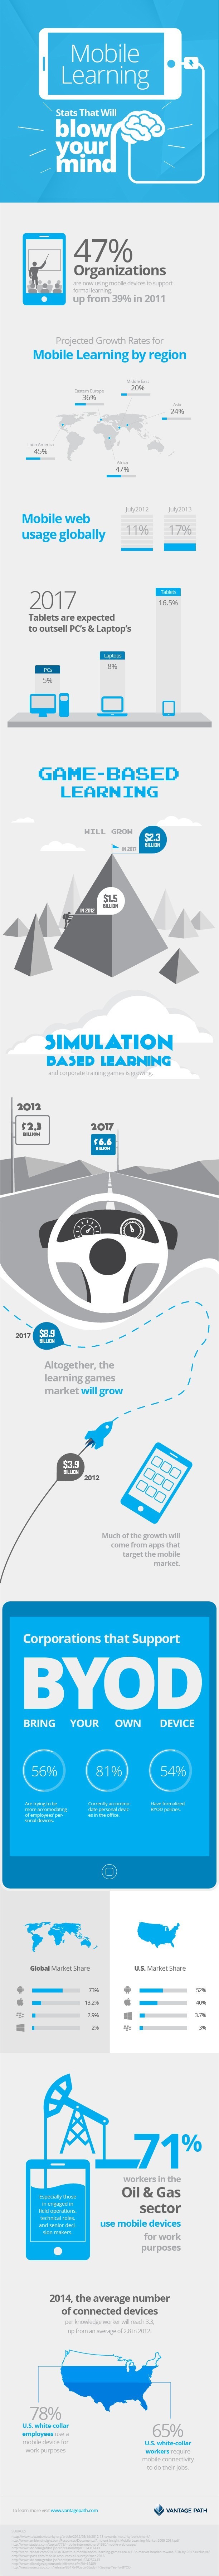 Top 9 Mobile Learning Stats Infographic thumbnail